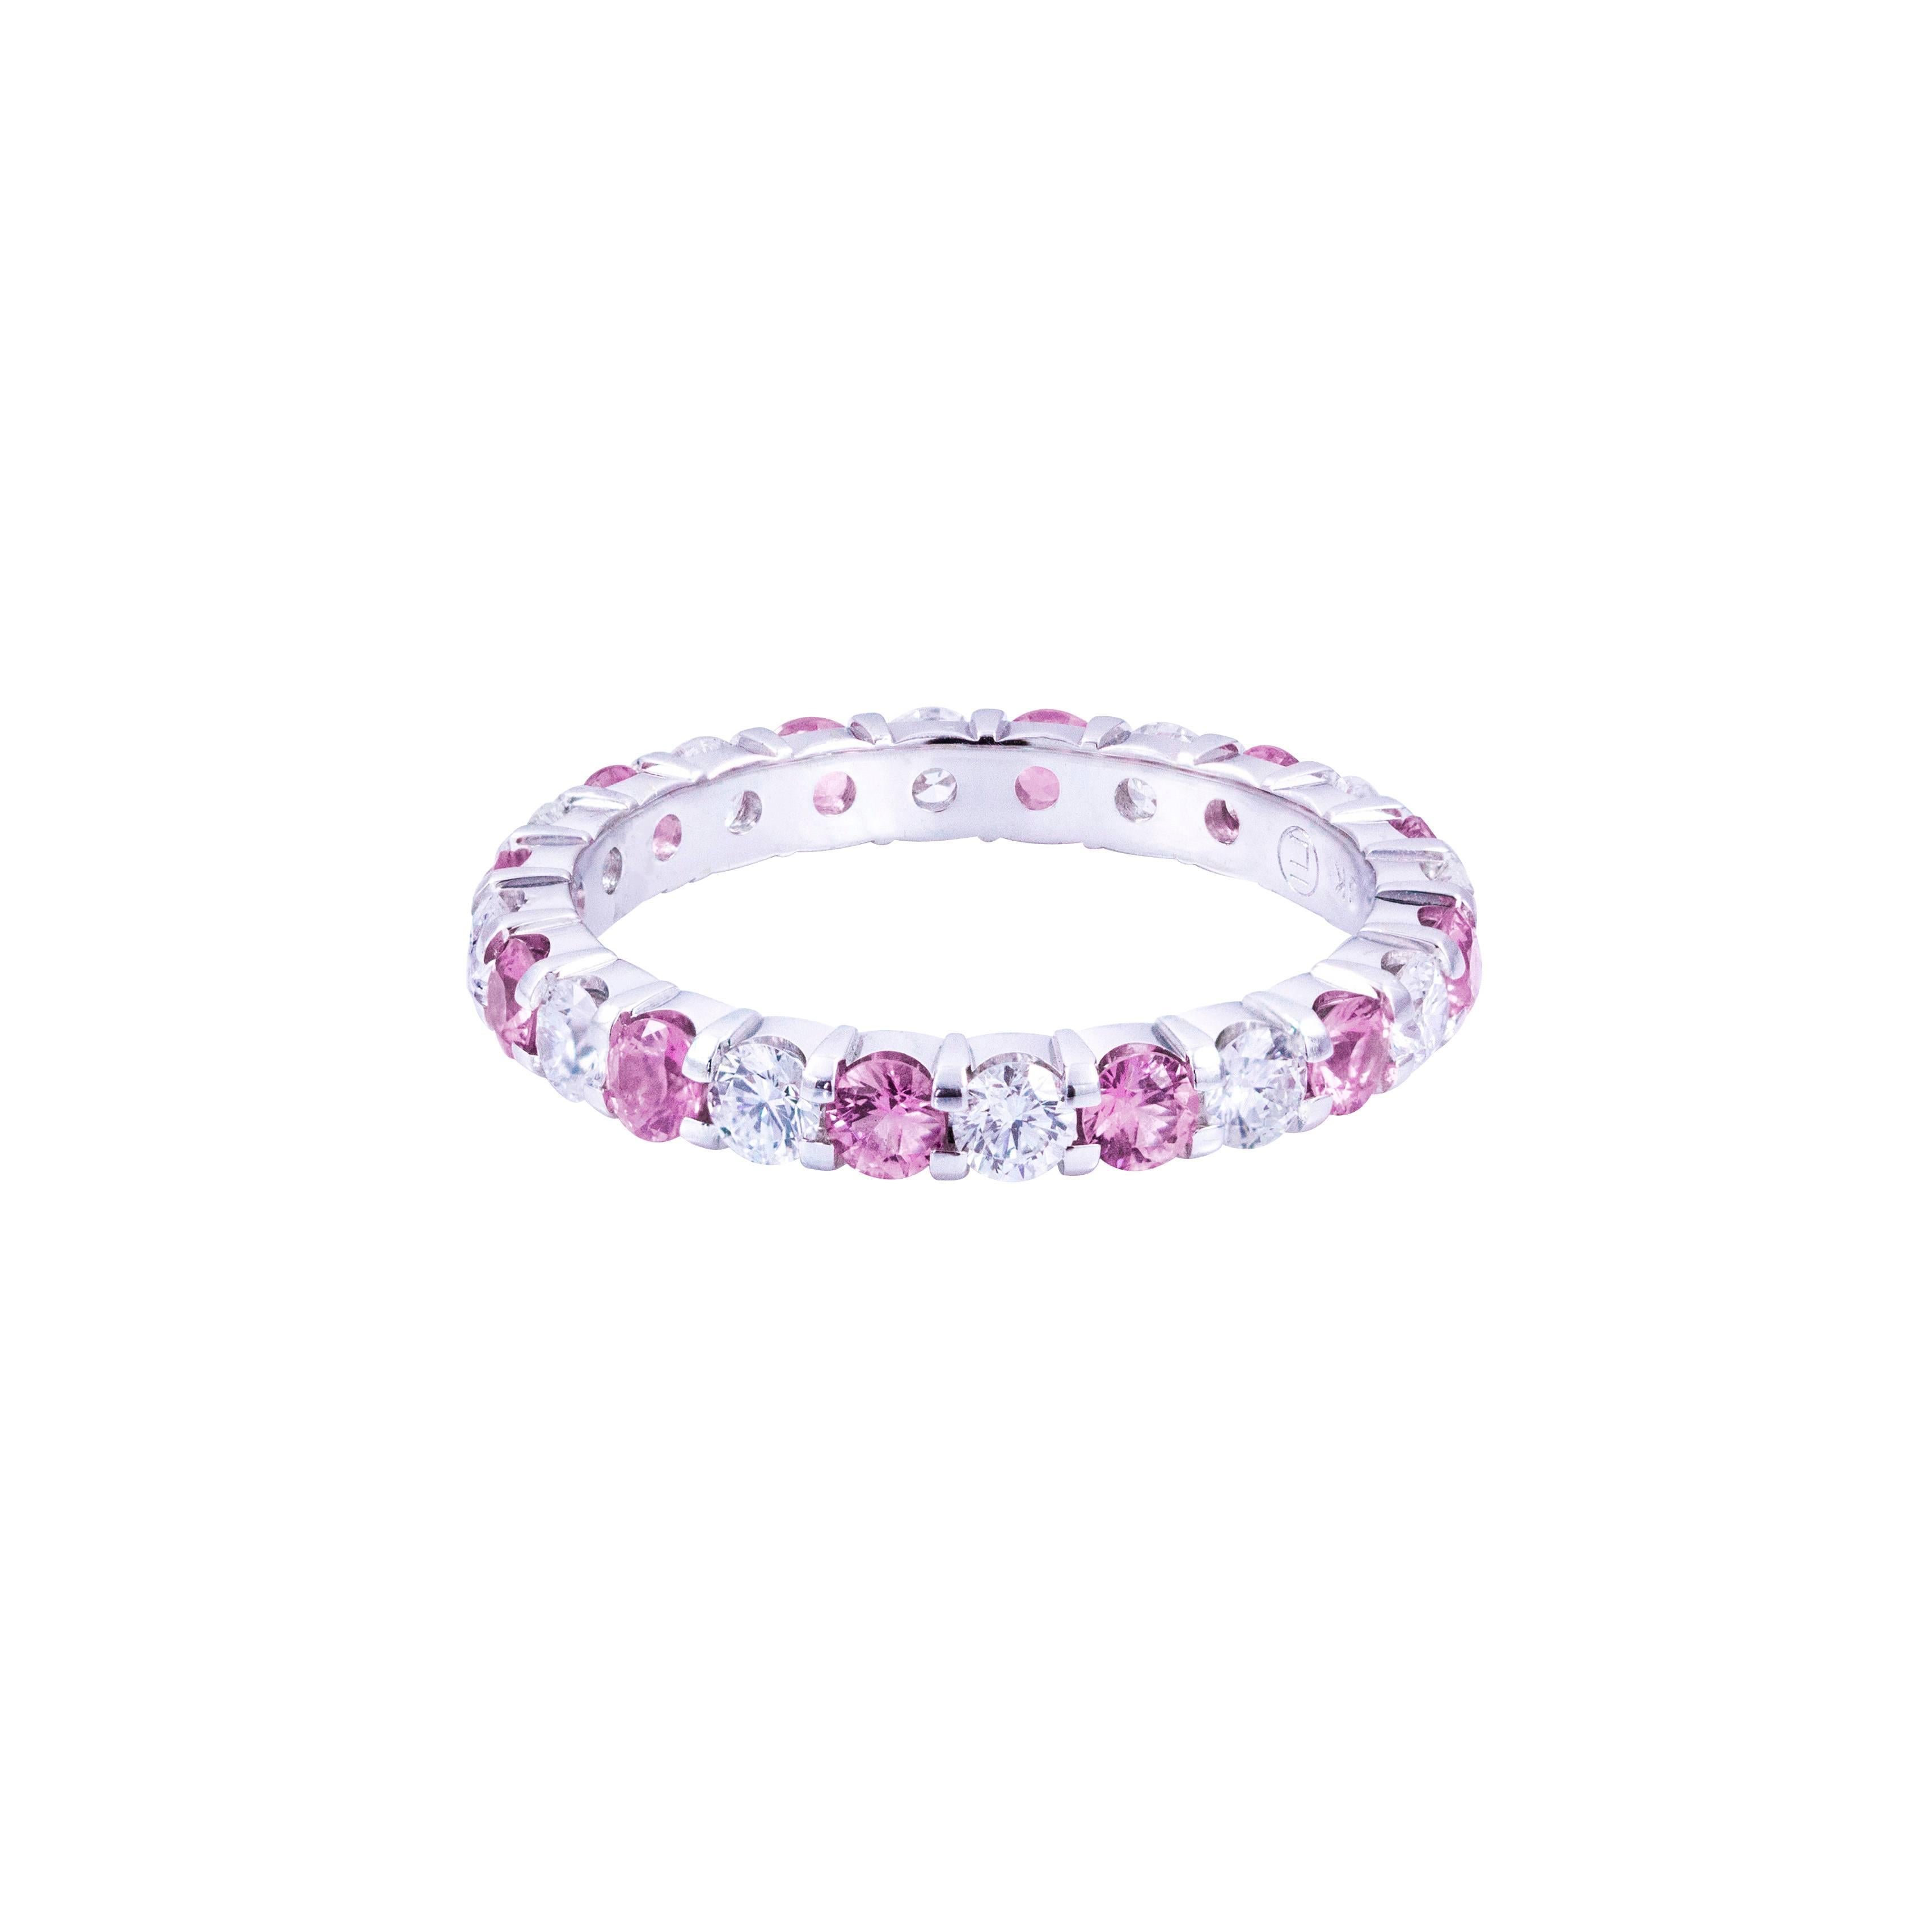 This gorgeous ring is set 12 natural pink sapphires weighing 1.14 carats that alternate with 12 round brilliant diamonds weighing 0.90 carats total. Set in 18k white gold. Size 7 US.

Style available in different price ranges. Prices are based on